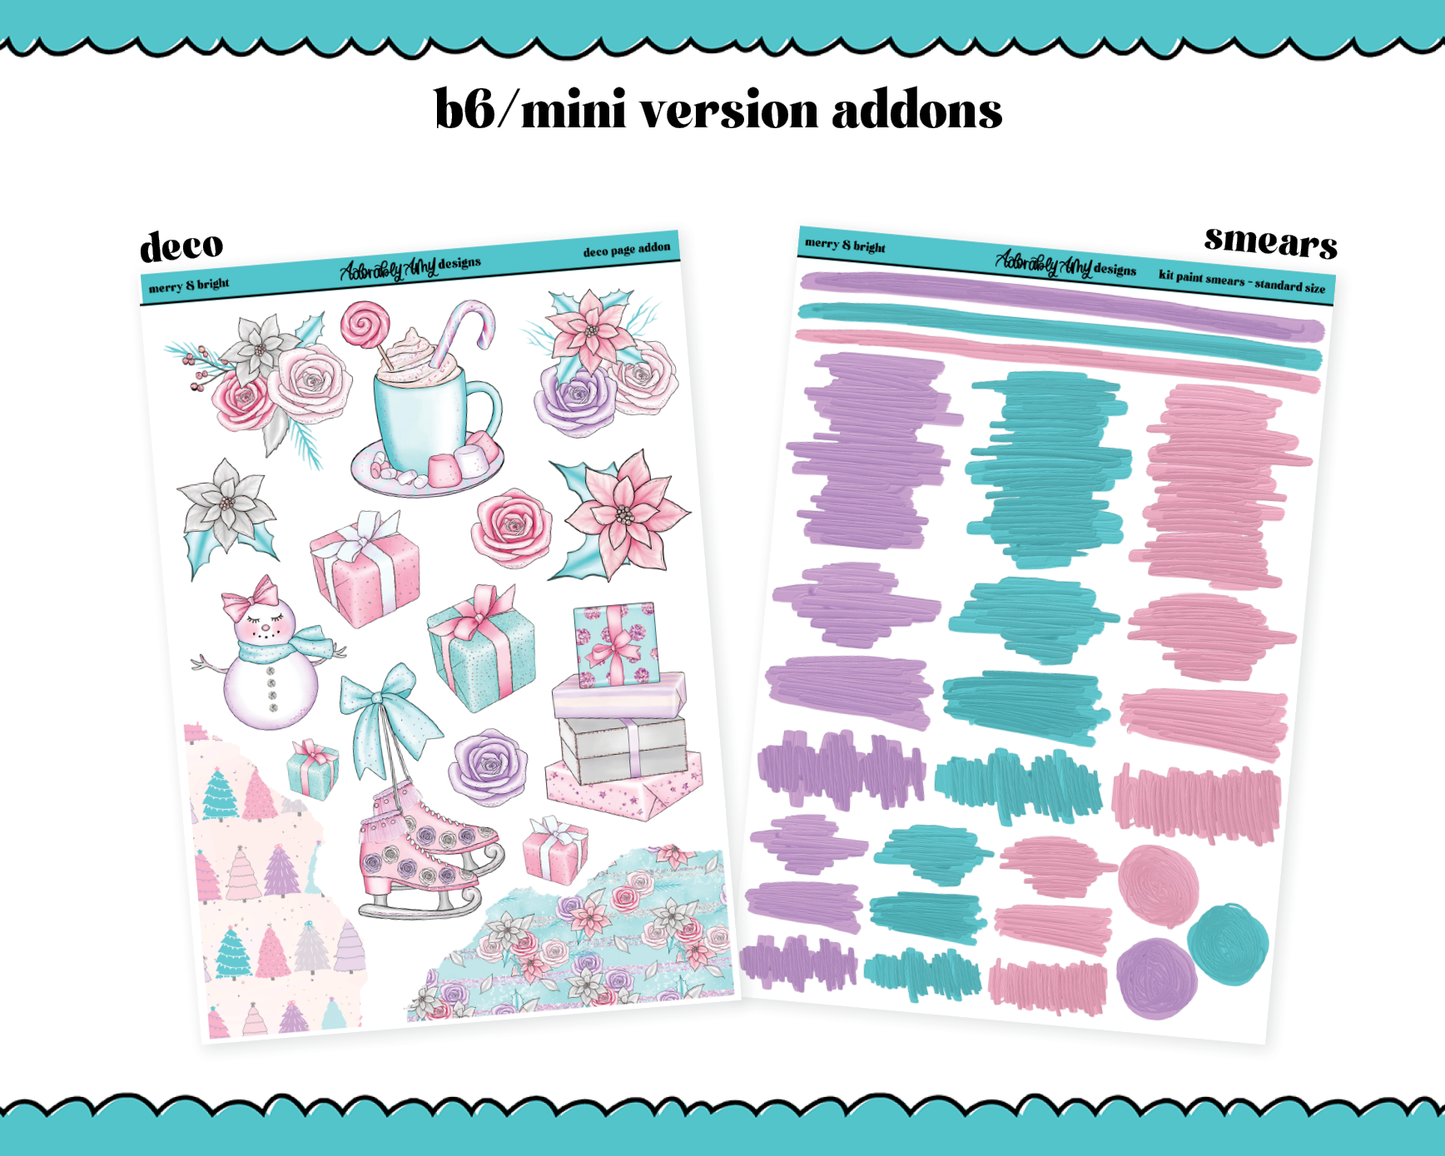 Mini B6 Merry & Bright Christmas Themed Weekly Planner Sticker Kit sized for ANY Vertical Insert